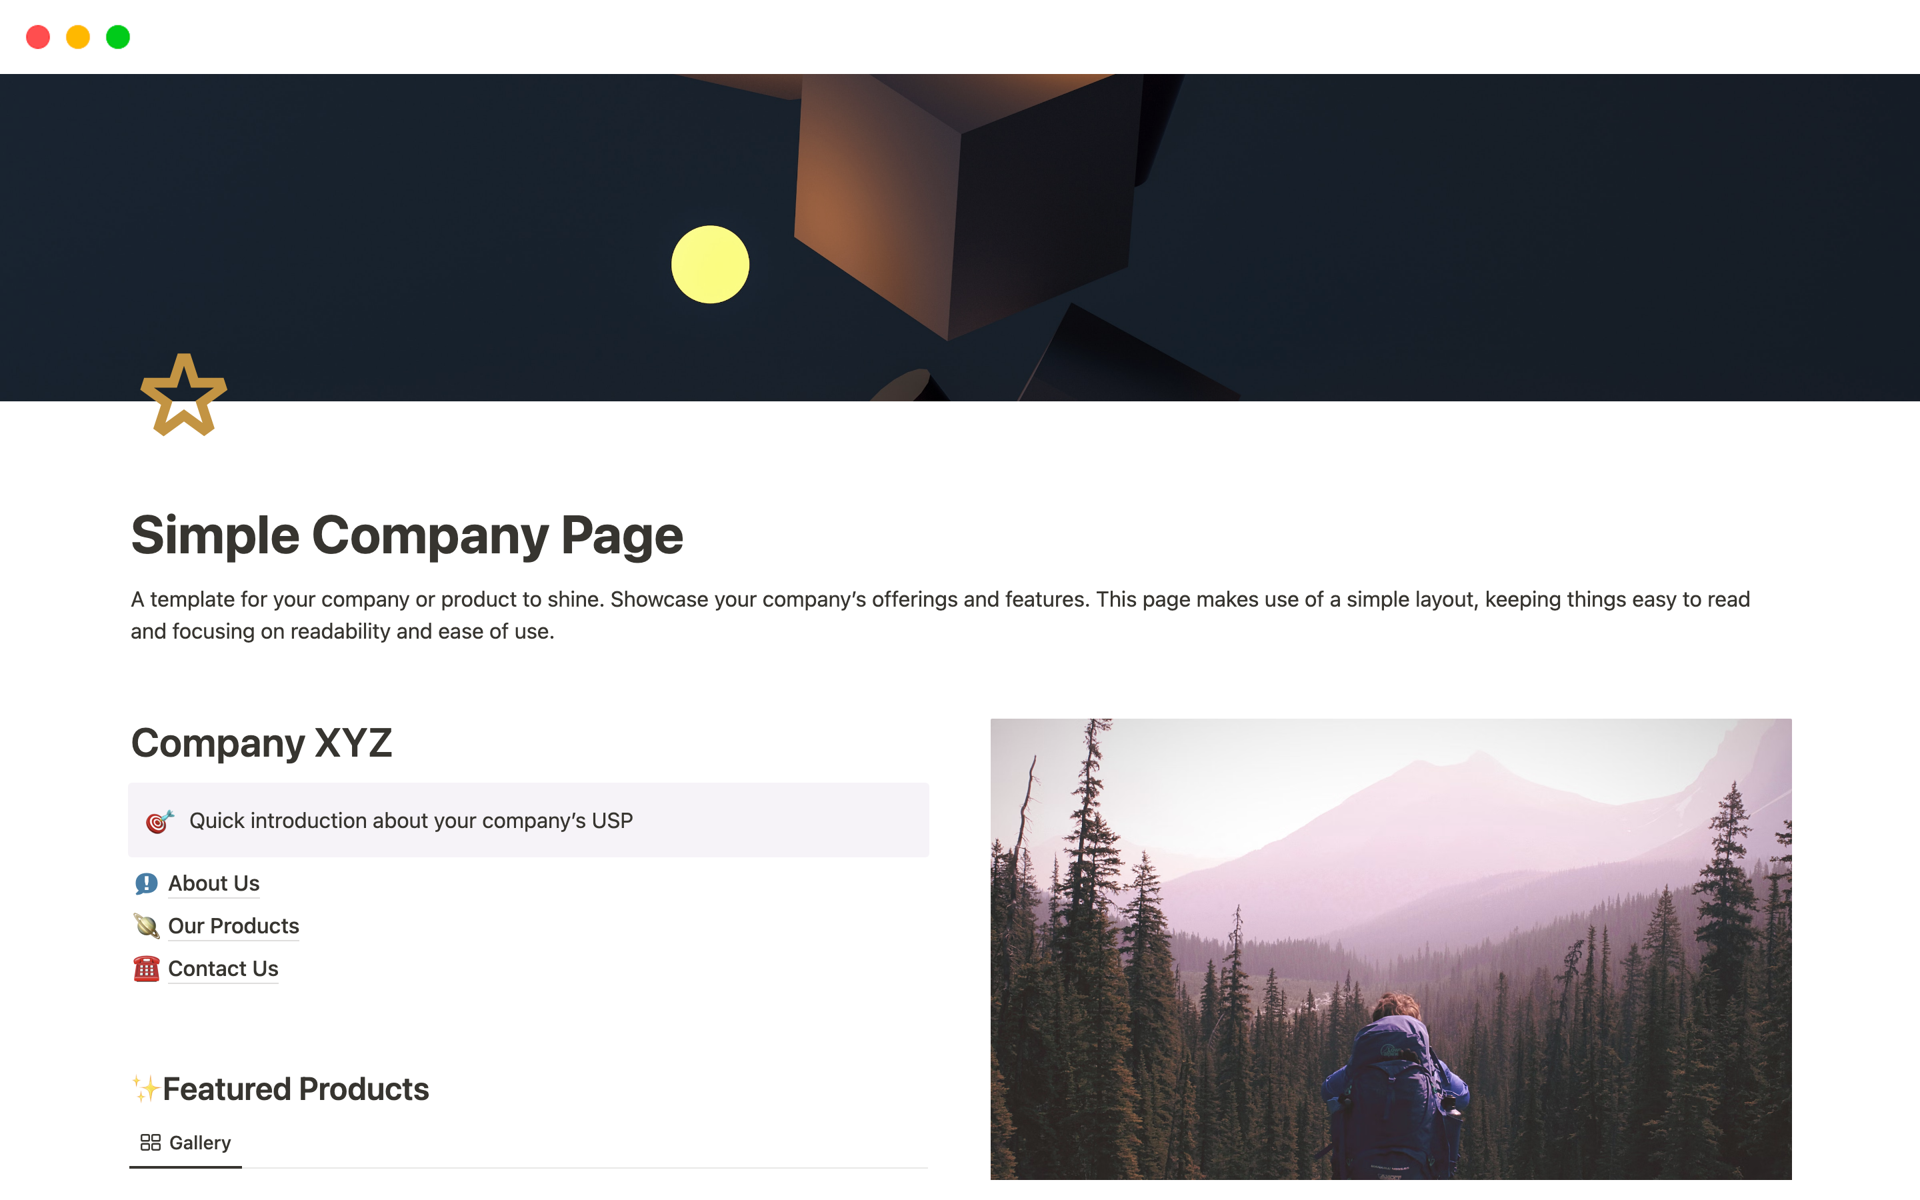 Landing page for new businesses or companies looking to get off the ground with a simple Notion page